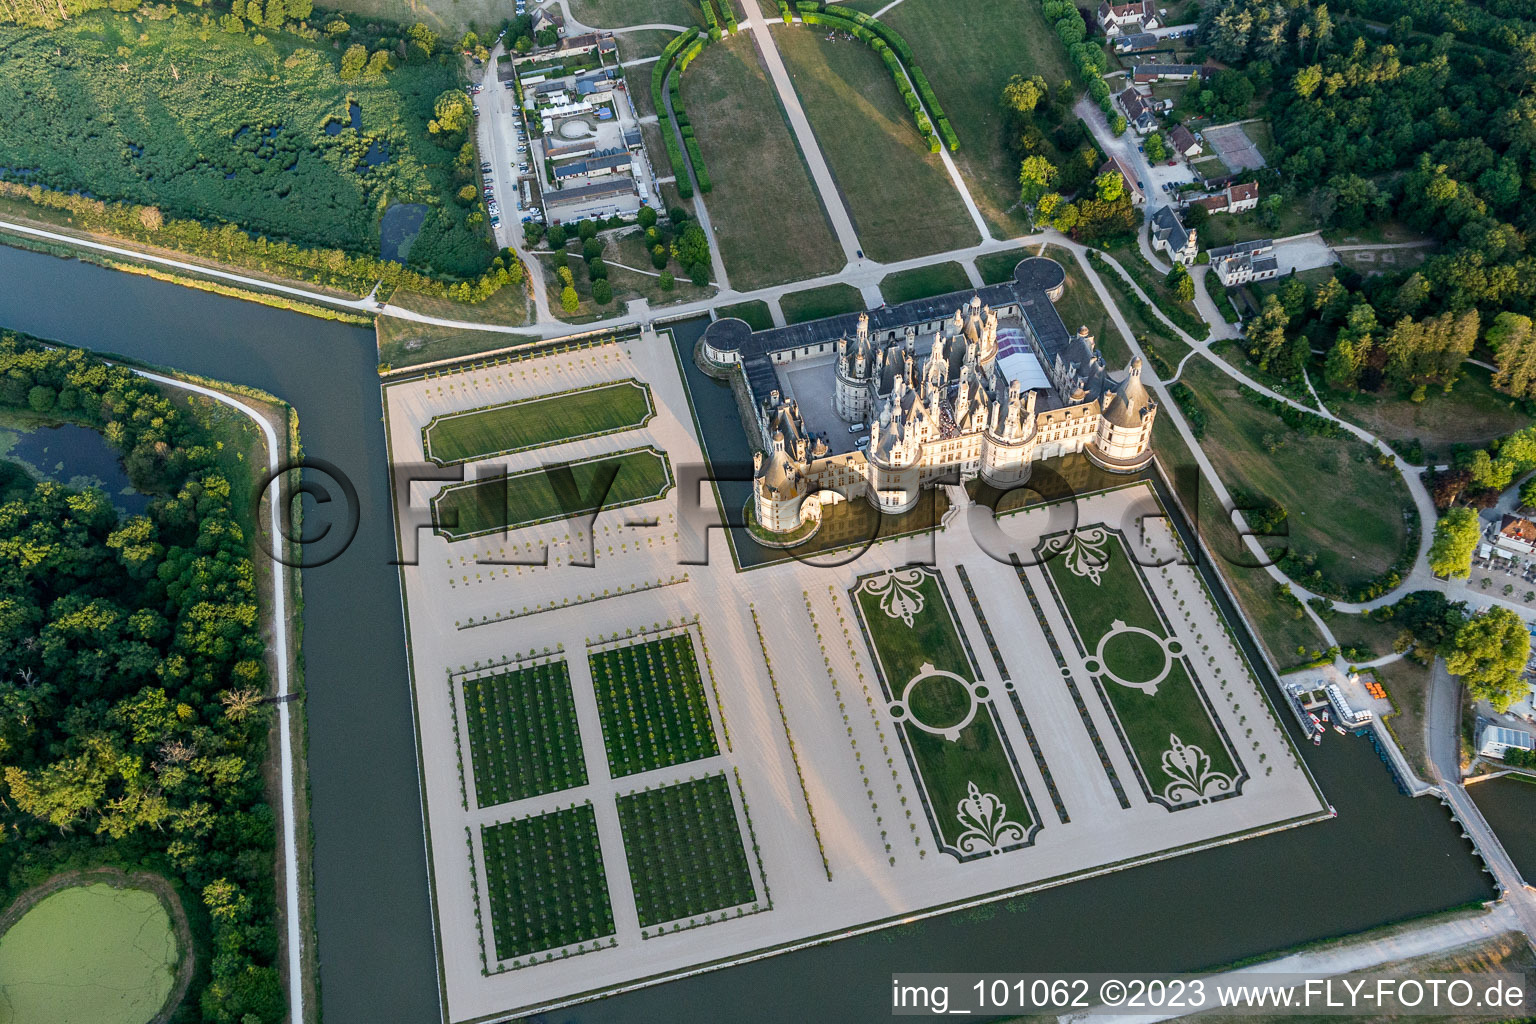 Chambord in the state Loir et Cher, France from the drone perspective